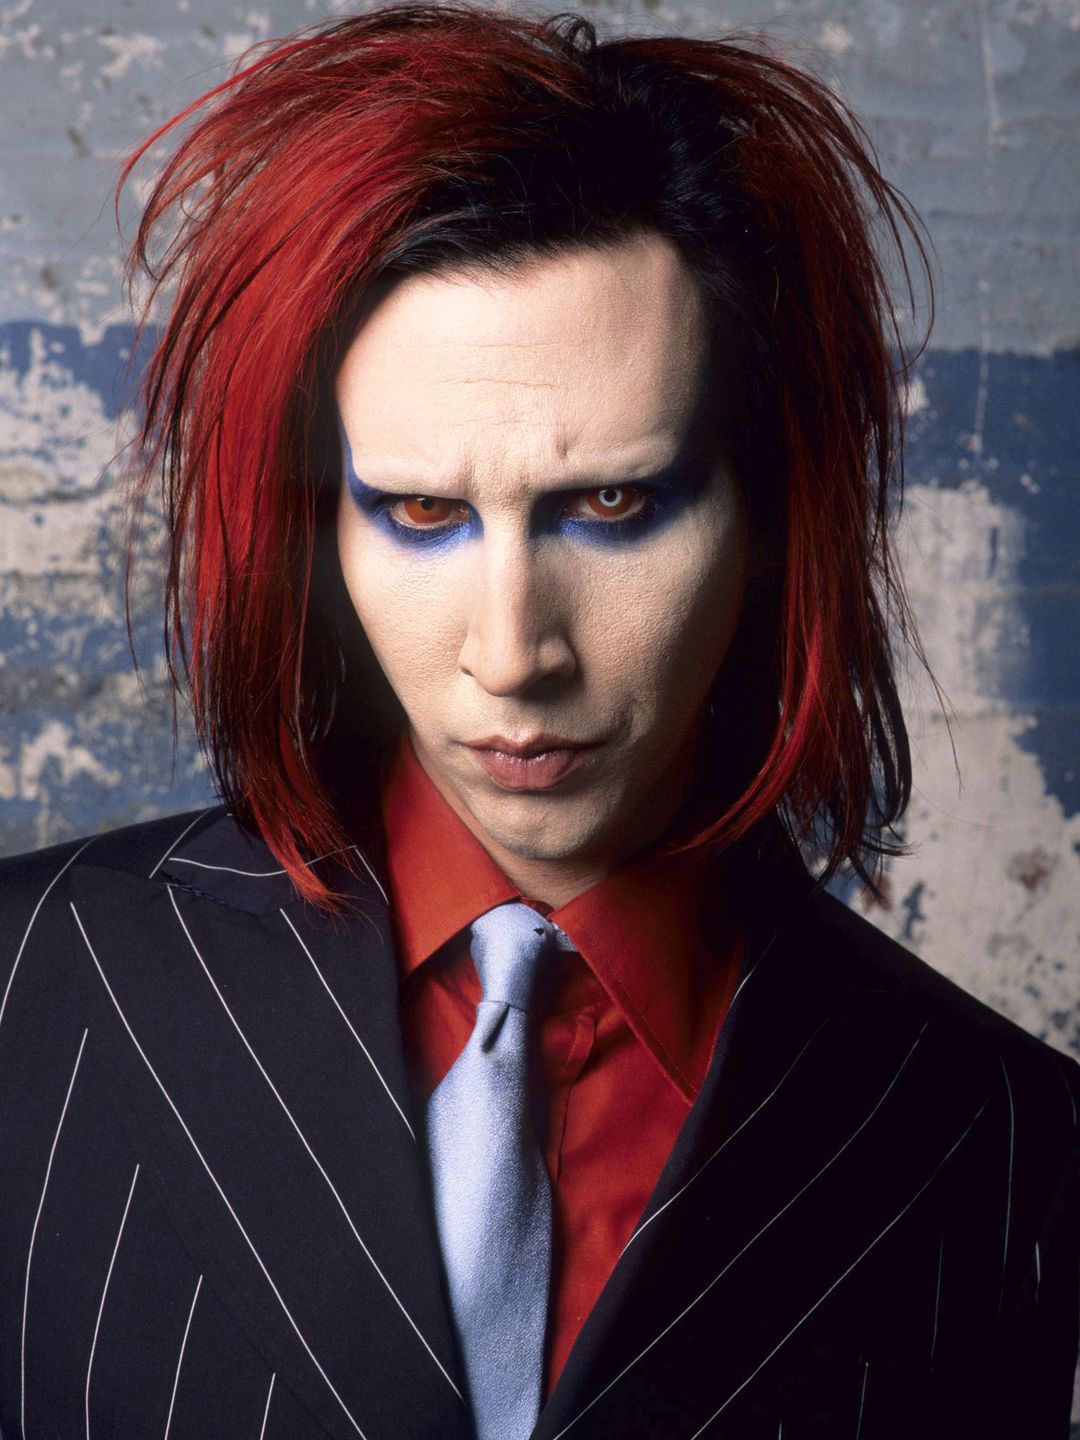 Marilyn Manson where did he study